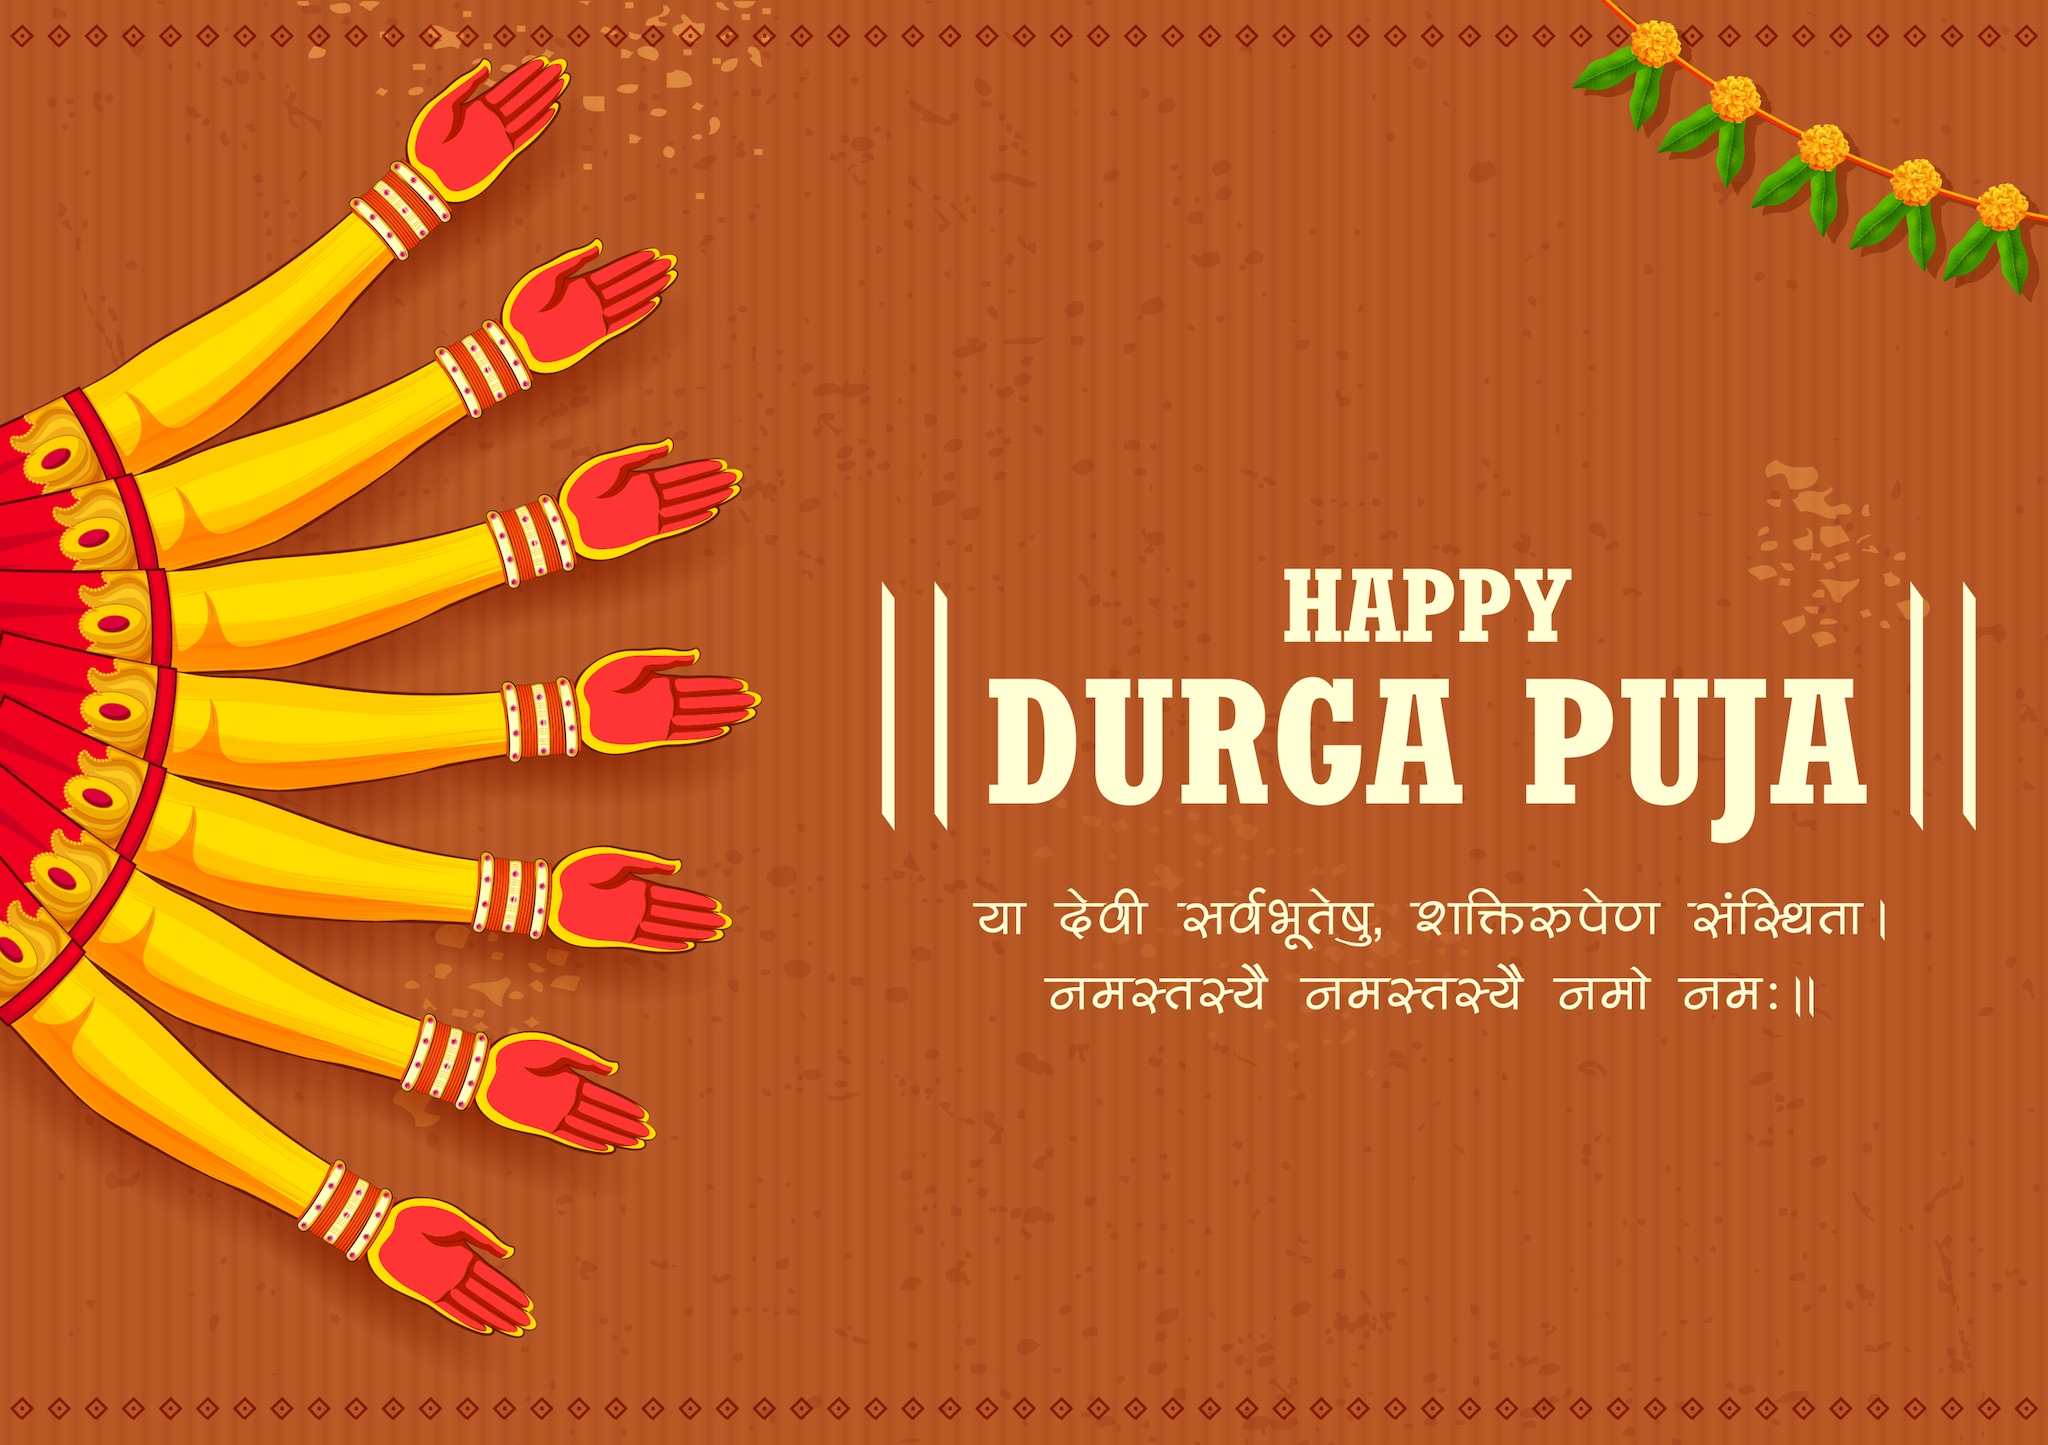 Happy Durga Puja 2022: Wishes Images, Quotes, Photos, Pics, Facebook SMS and Messages to share with your loved ones. (Image: Shutterstock)